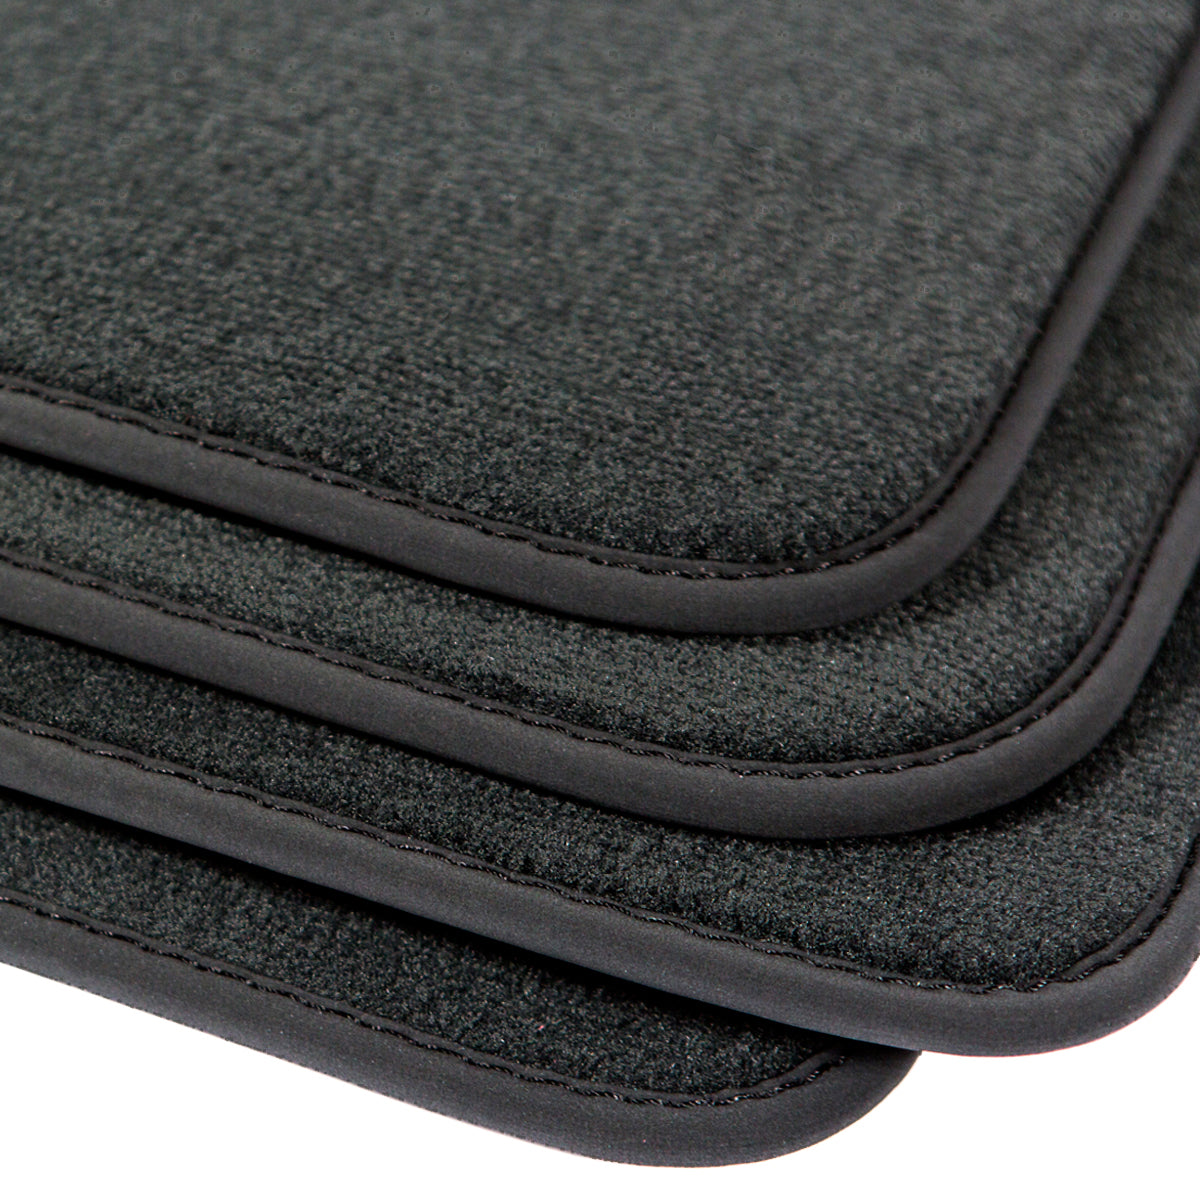 BMW Floor Mats with OEM Quality, Perfect Fit